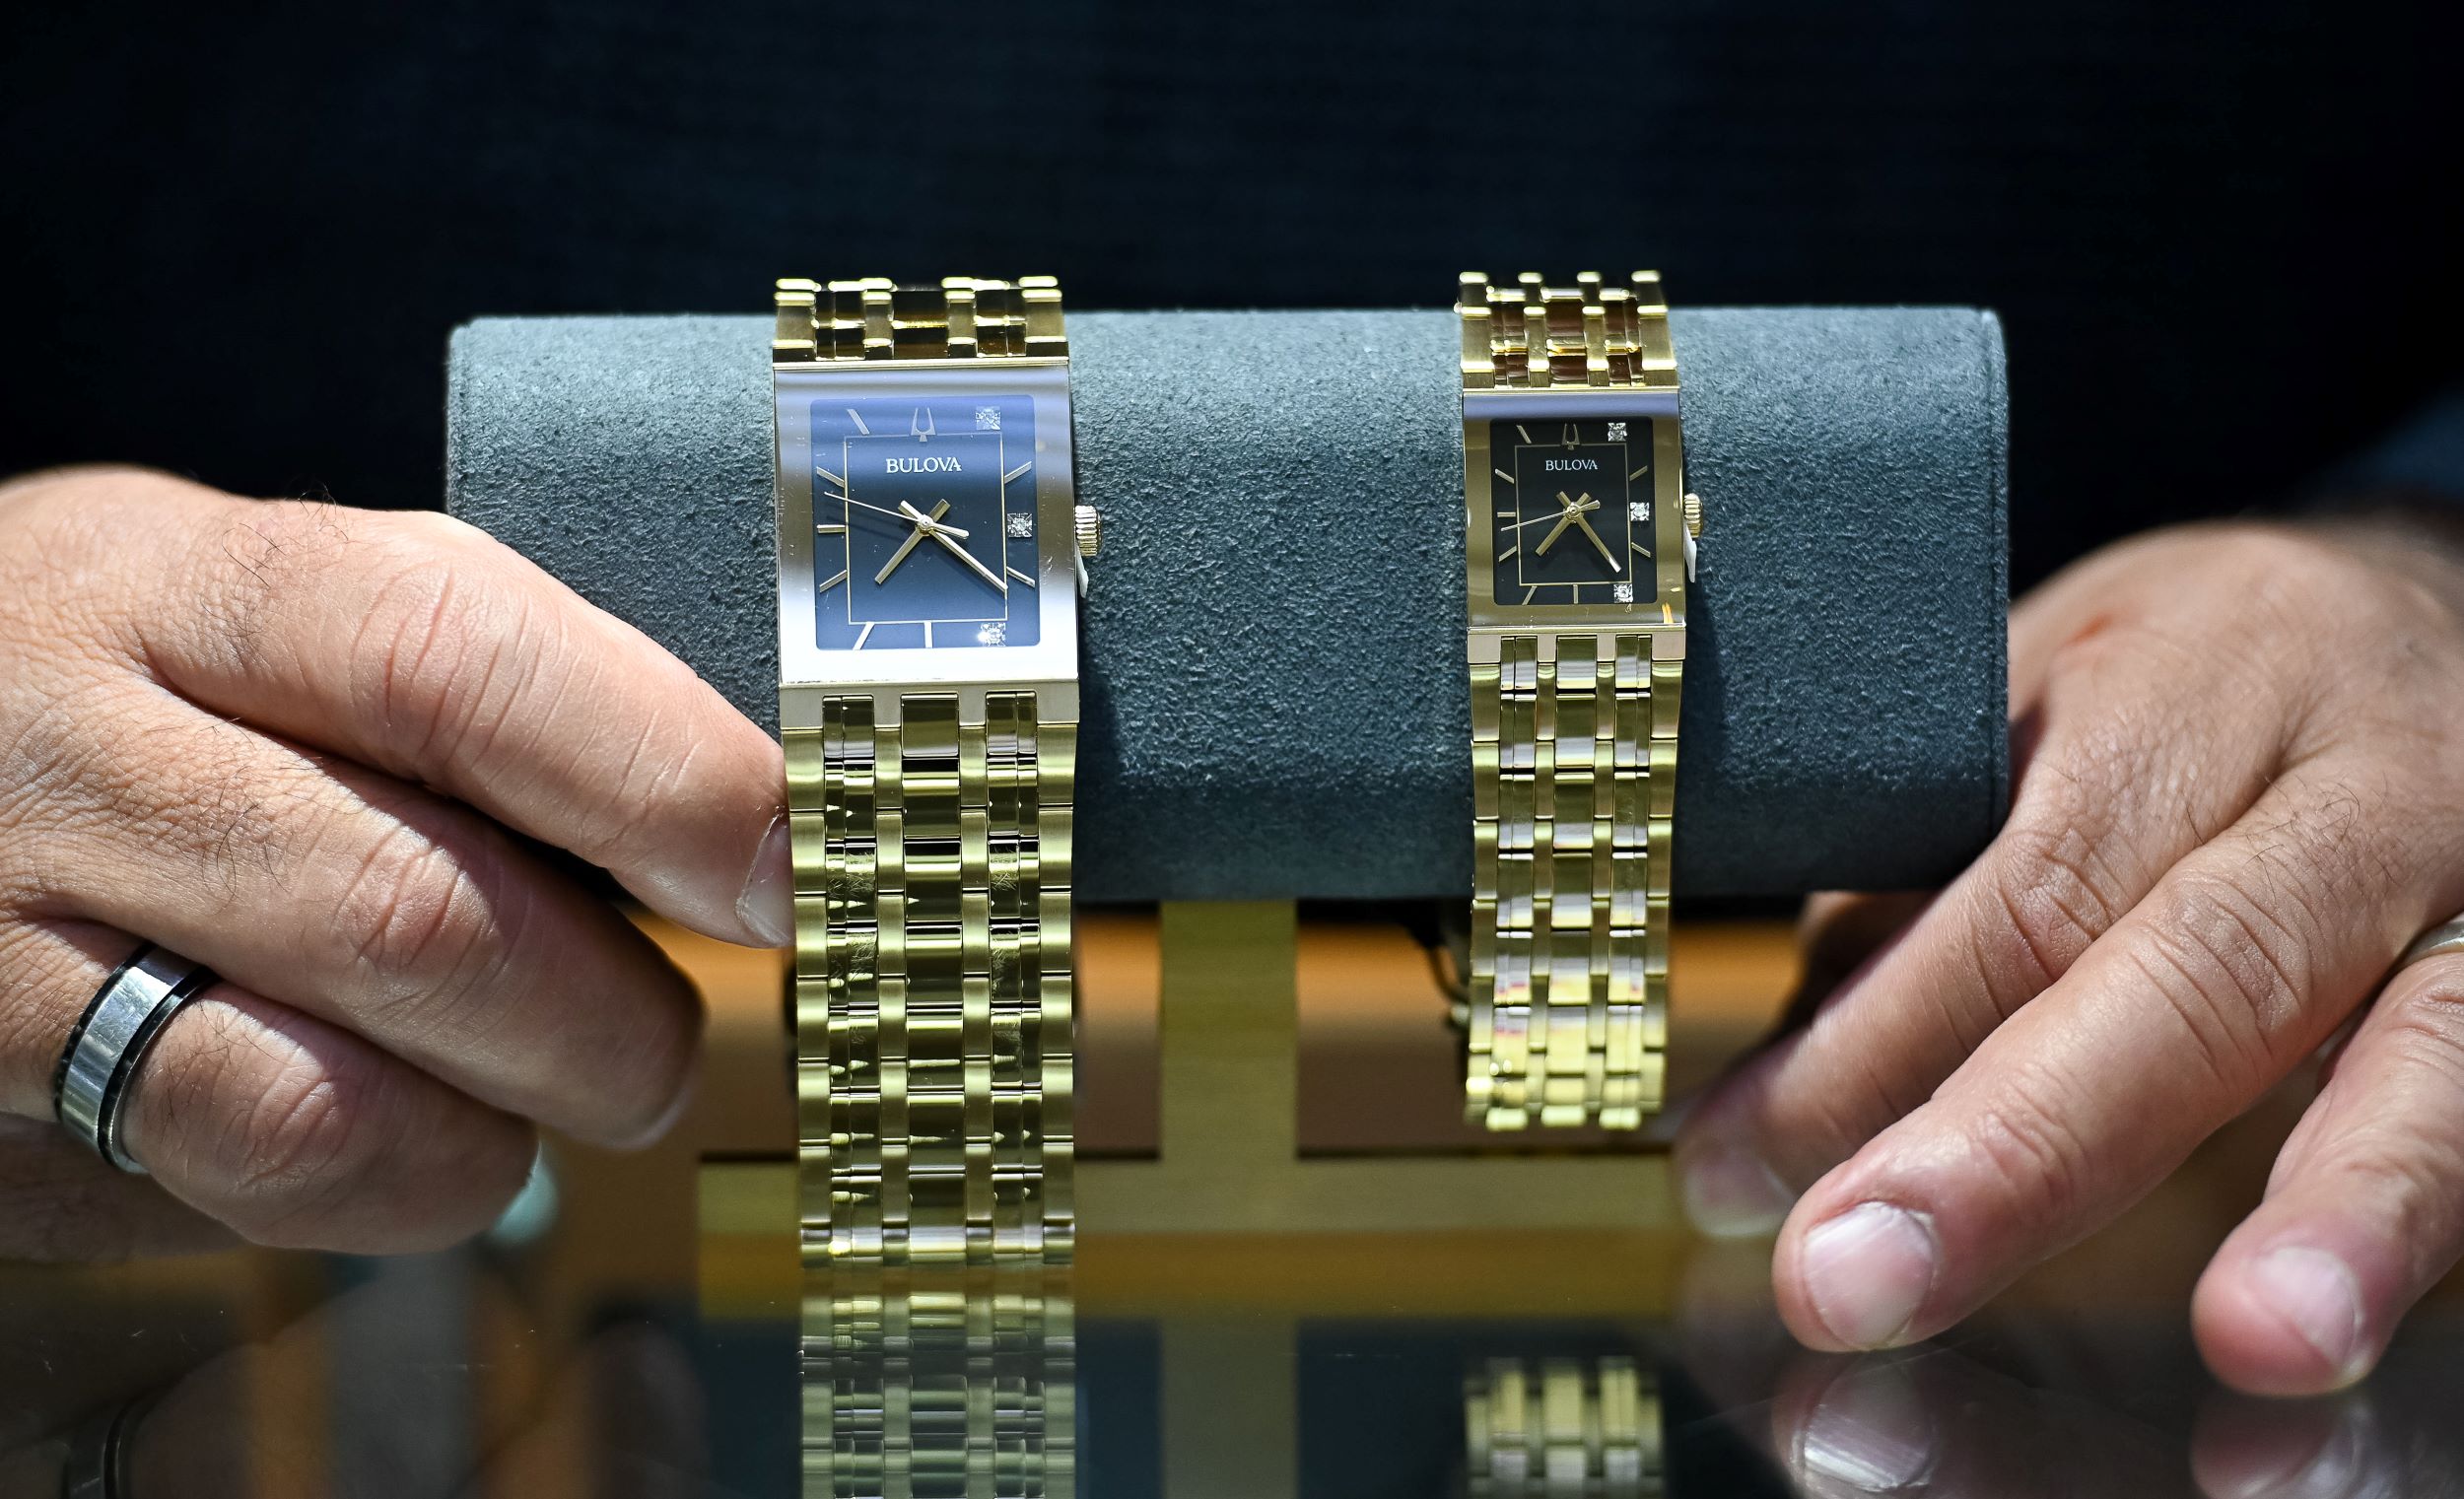 A person displaying two luxury gold watches placed on a gray cushion, with a focus on their hands and the watches' details.